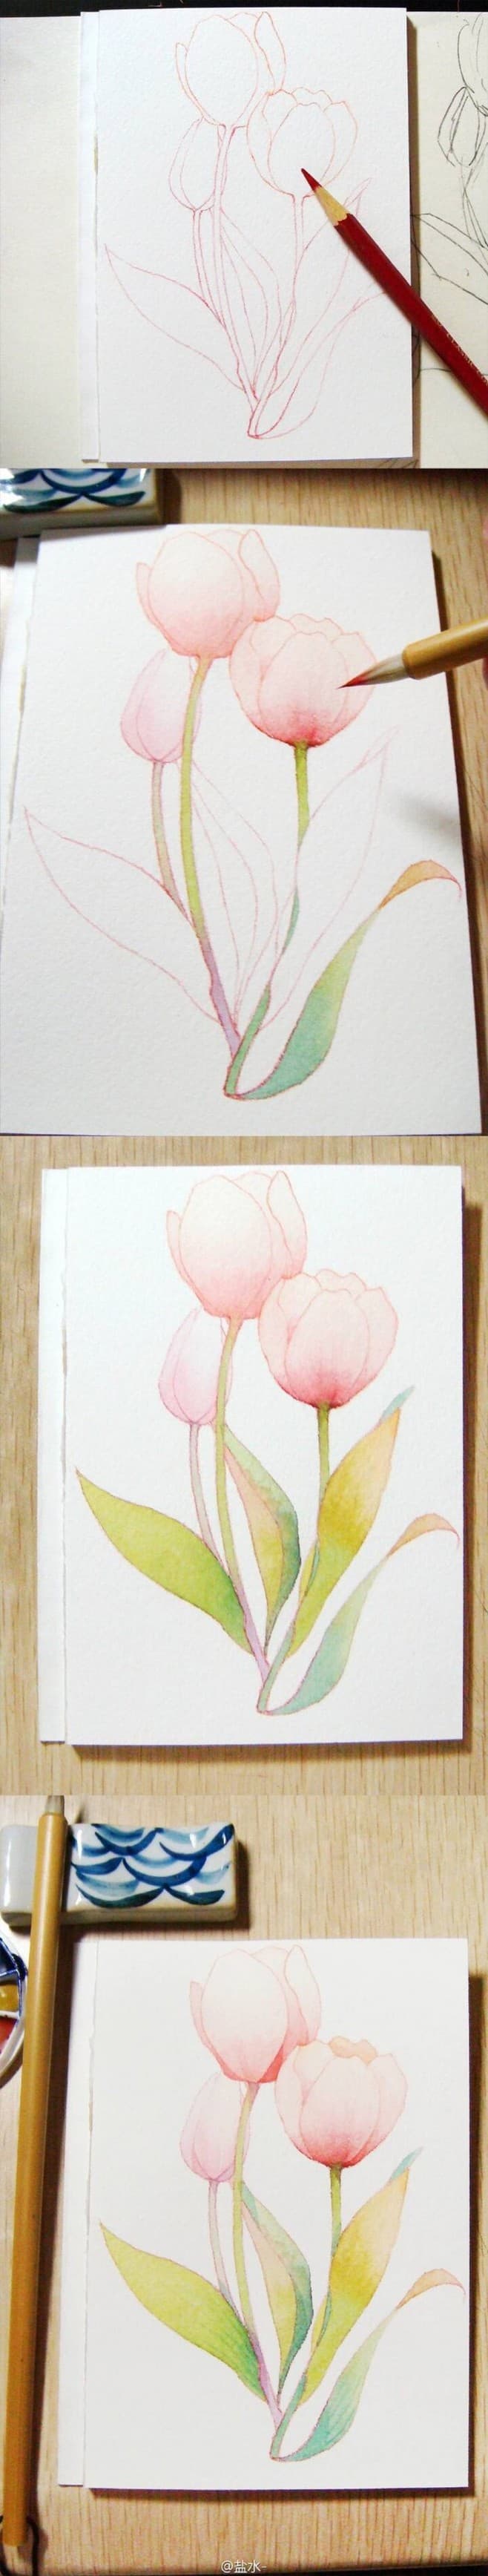 7. START WITH SOME SIMPLE FLOWERS LIKE A BOUQUET OF SPRING TULIPS